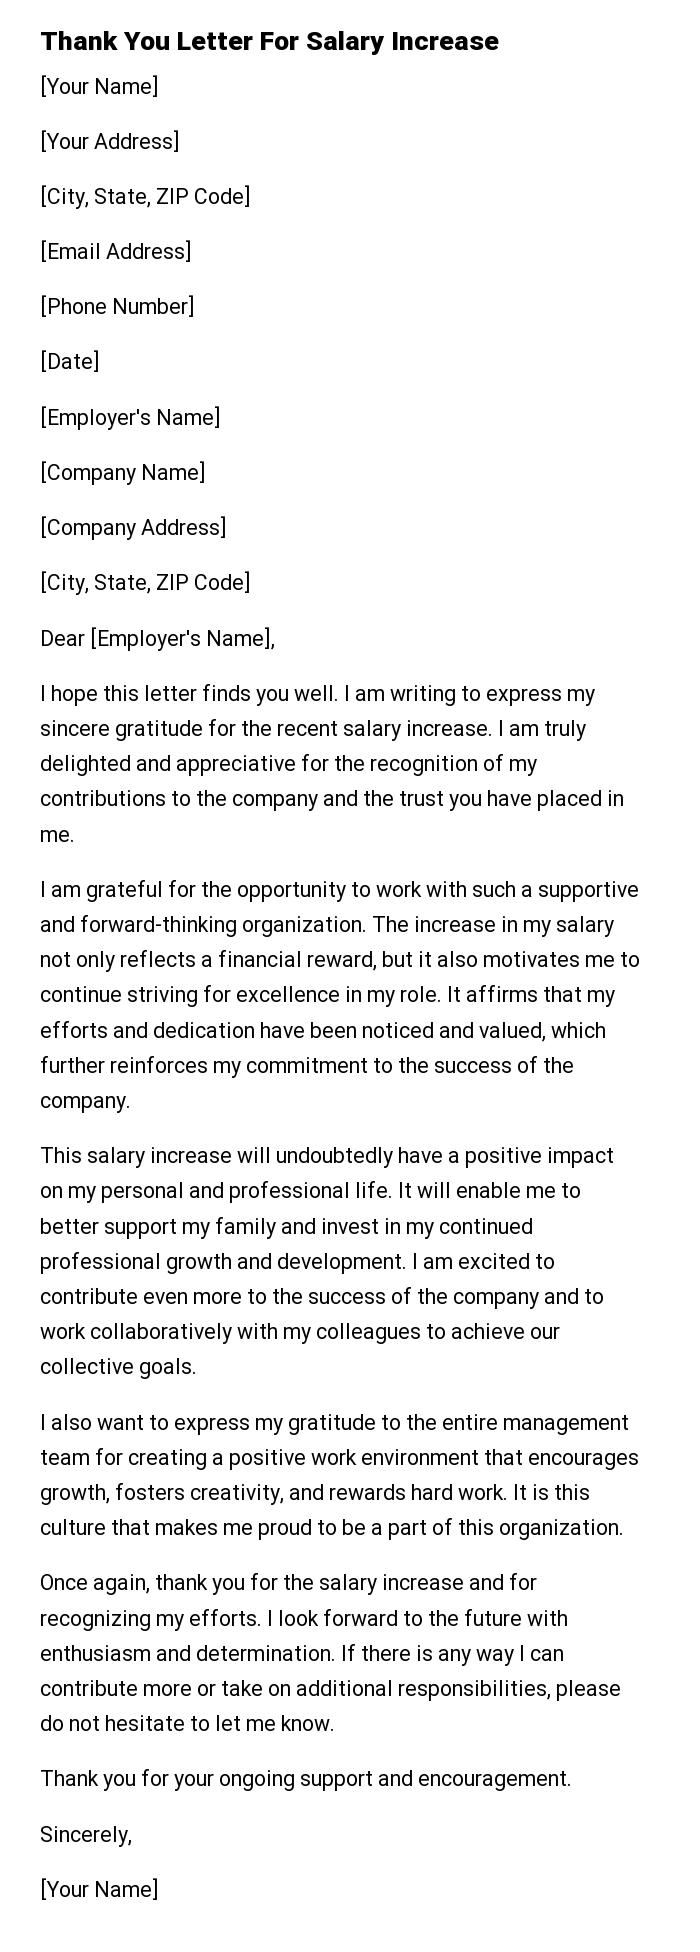 Thank You Letter For Salary Increase